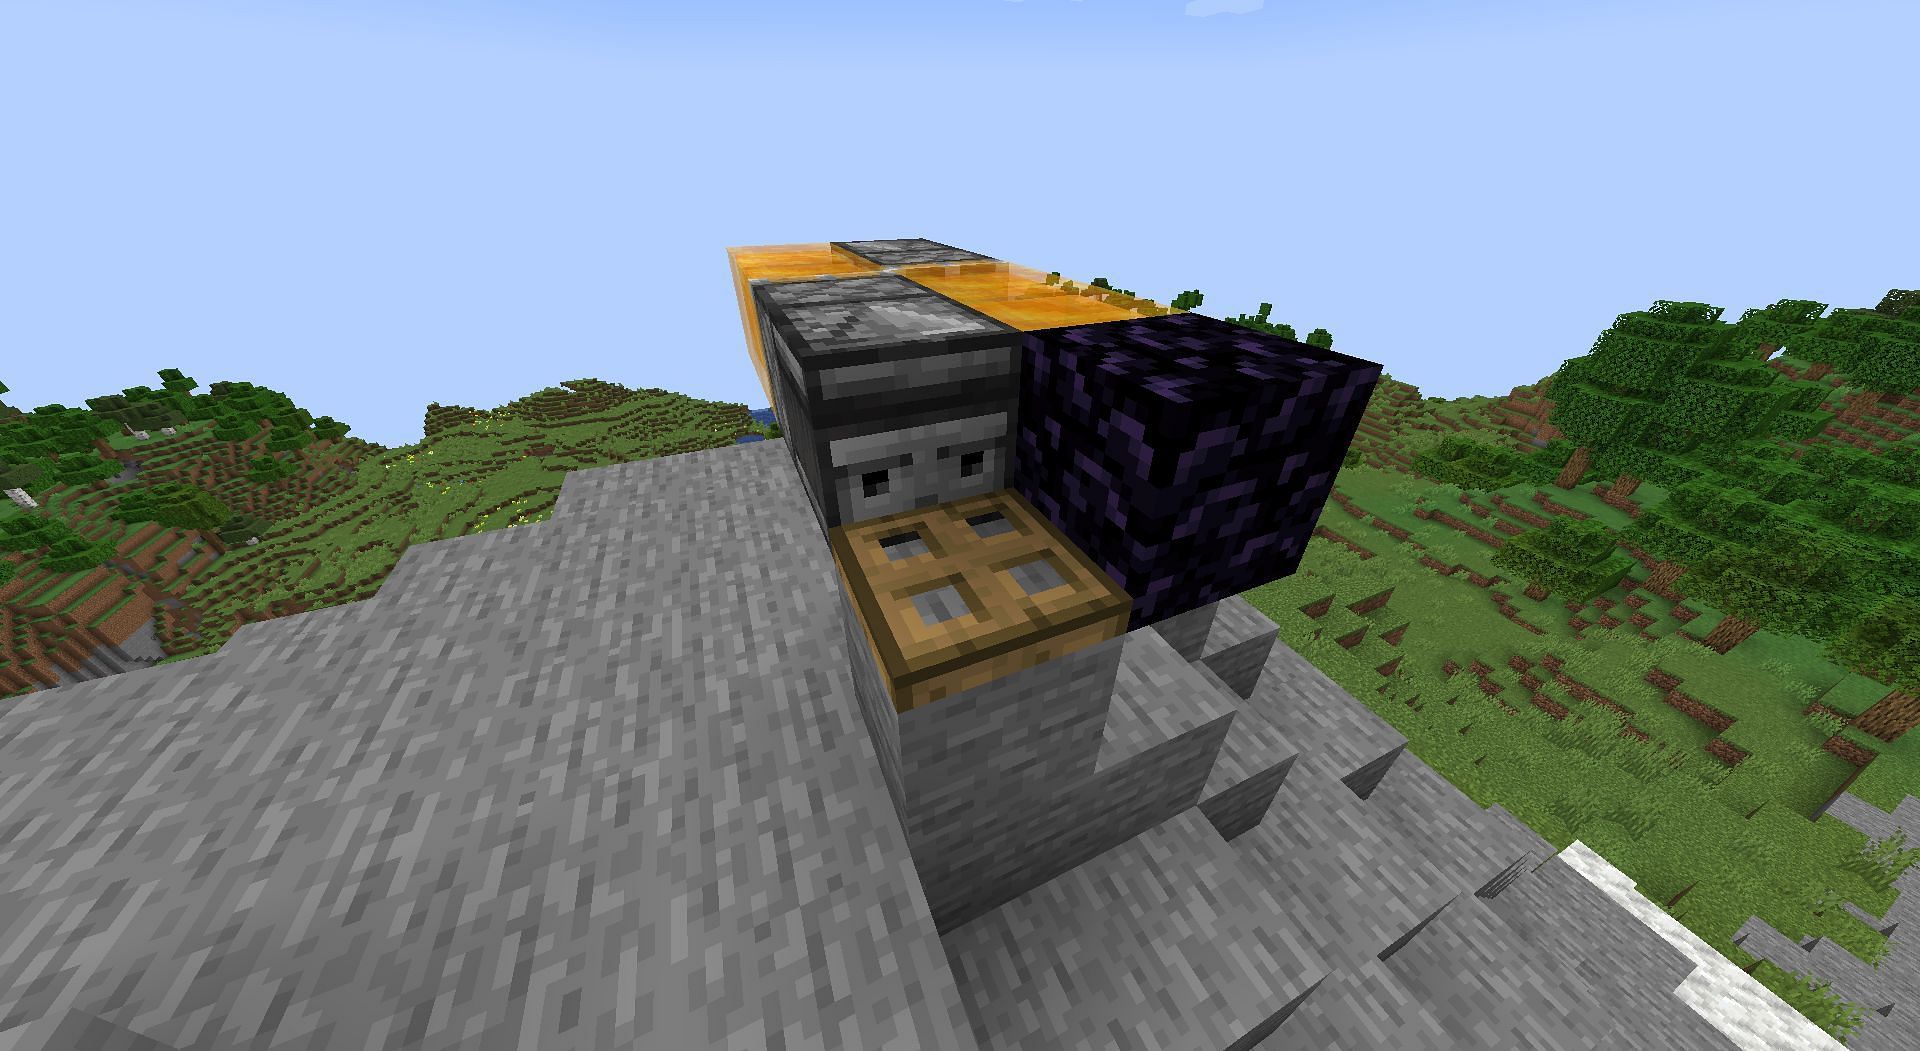 Station to stop and start the machine (Image via Minecraft)